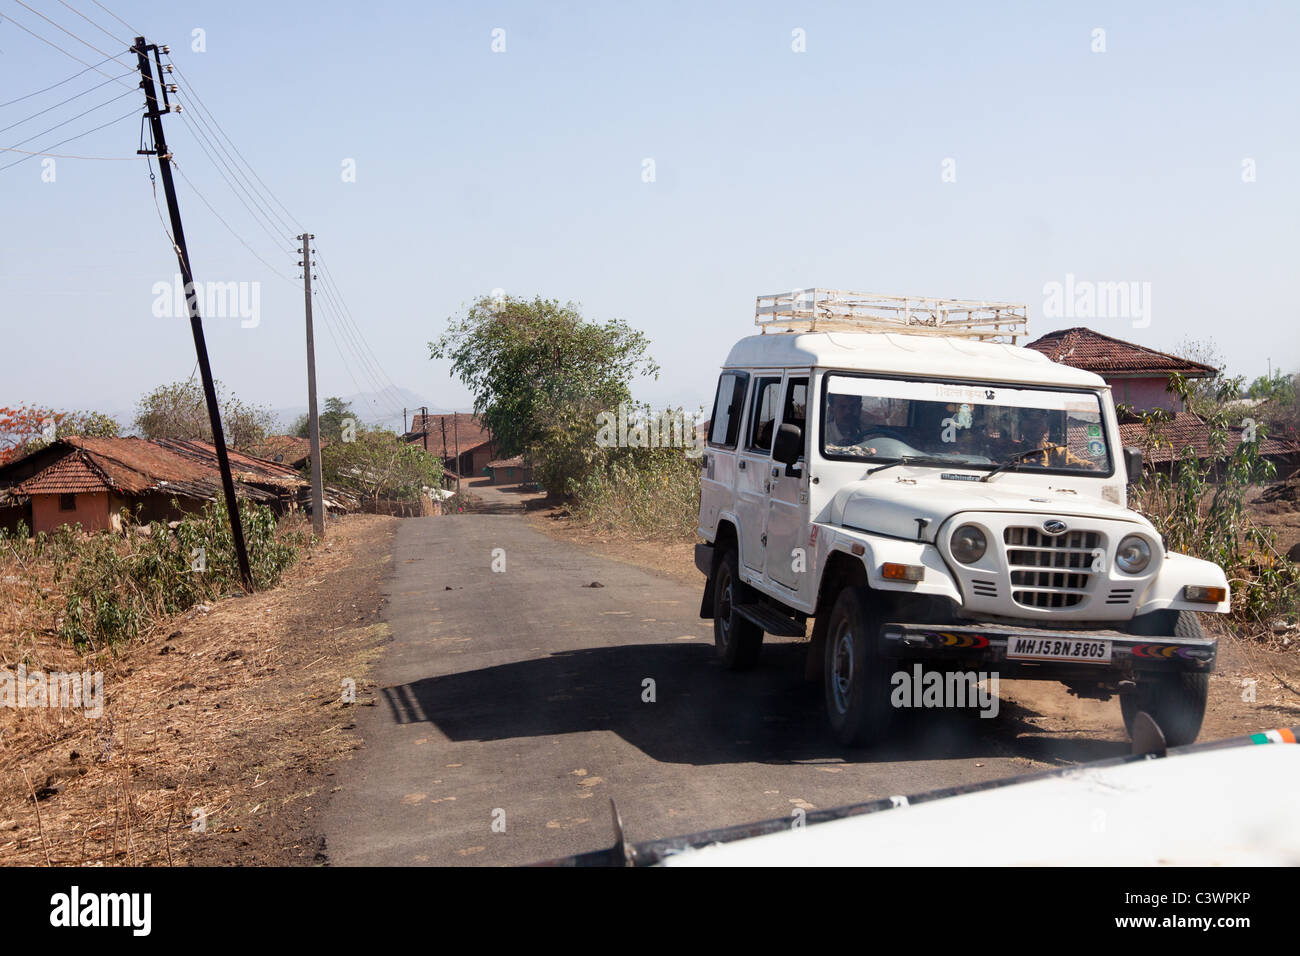 Jeeps are used as taxis in many villages in Maharashtra, India Stock Photo